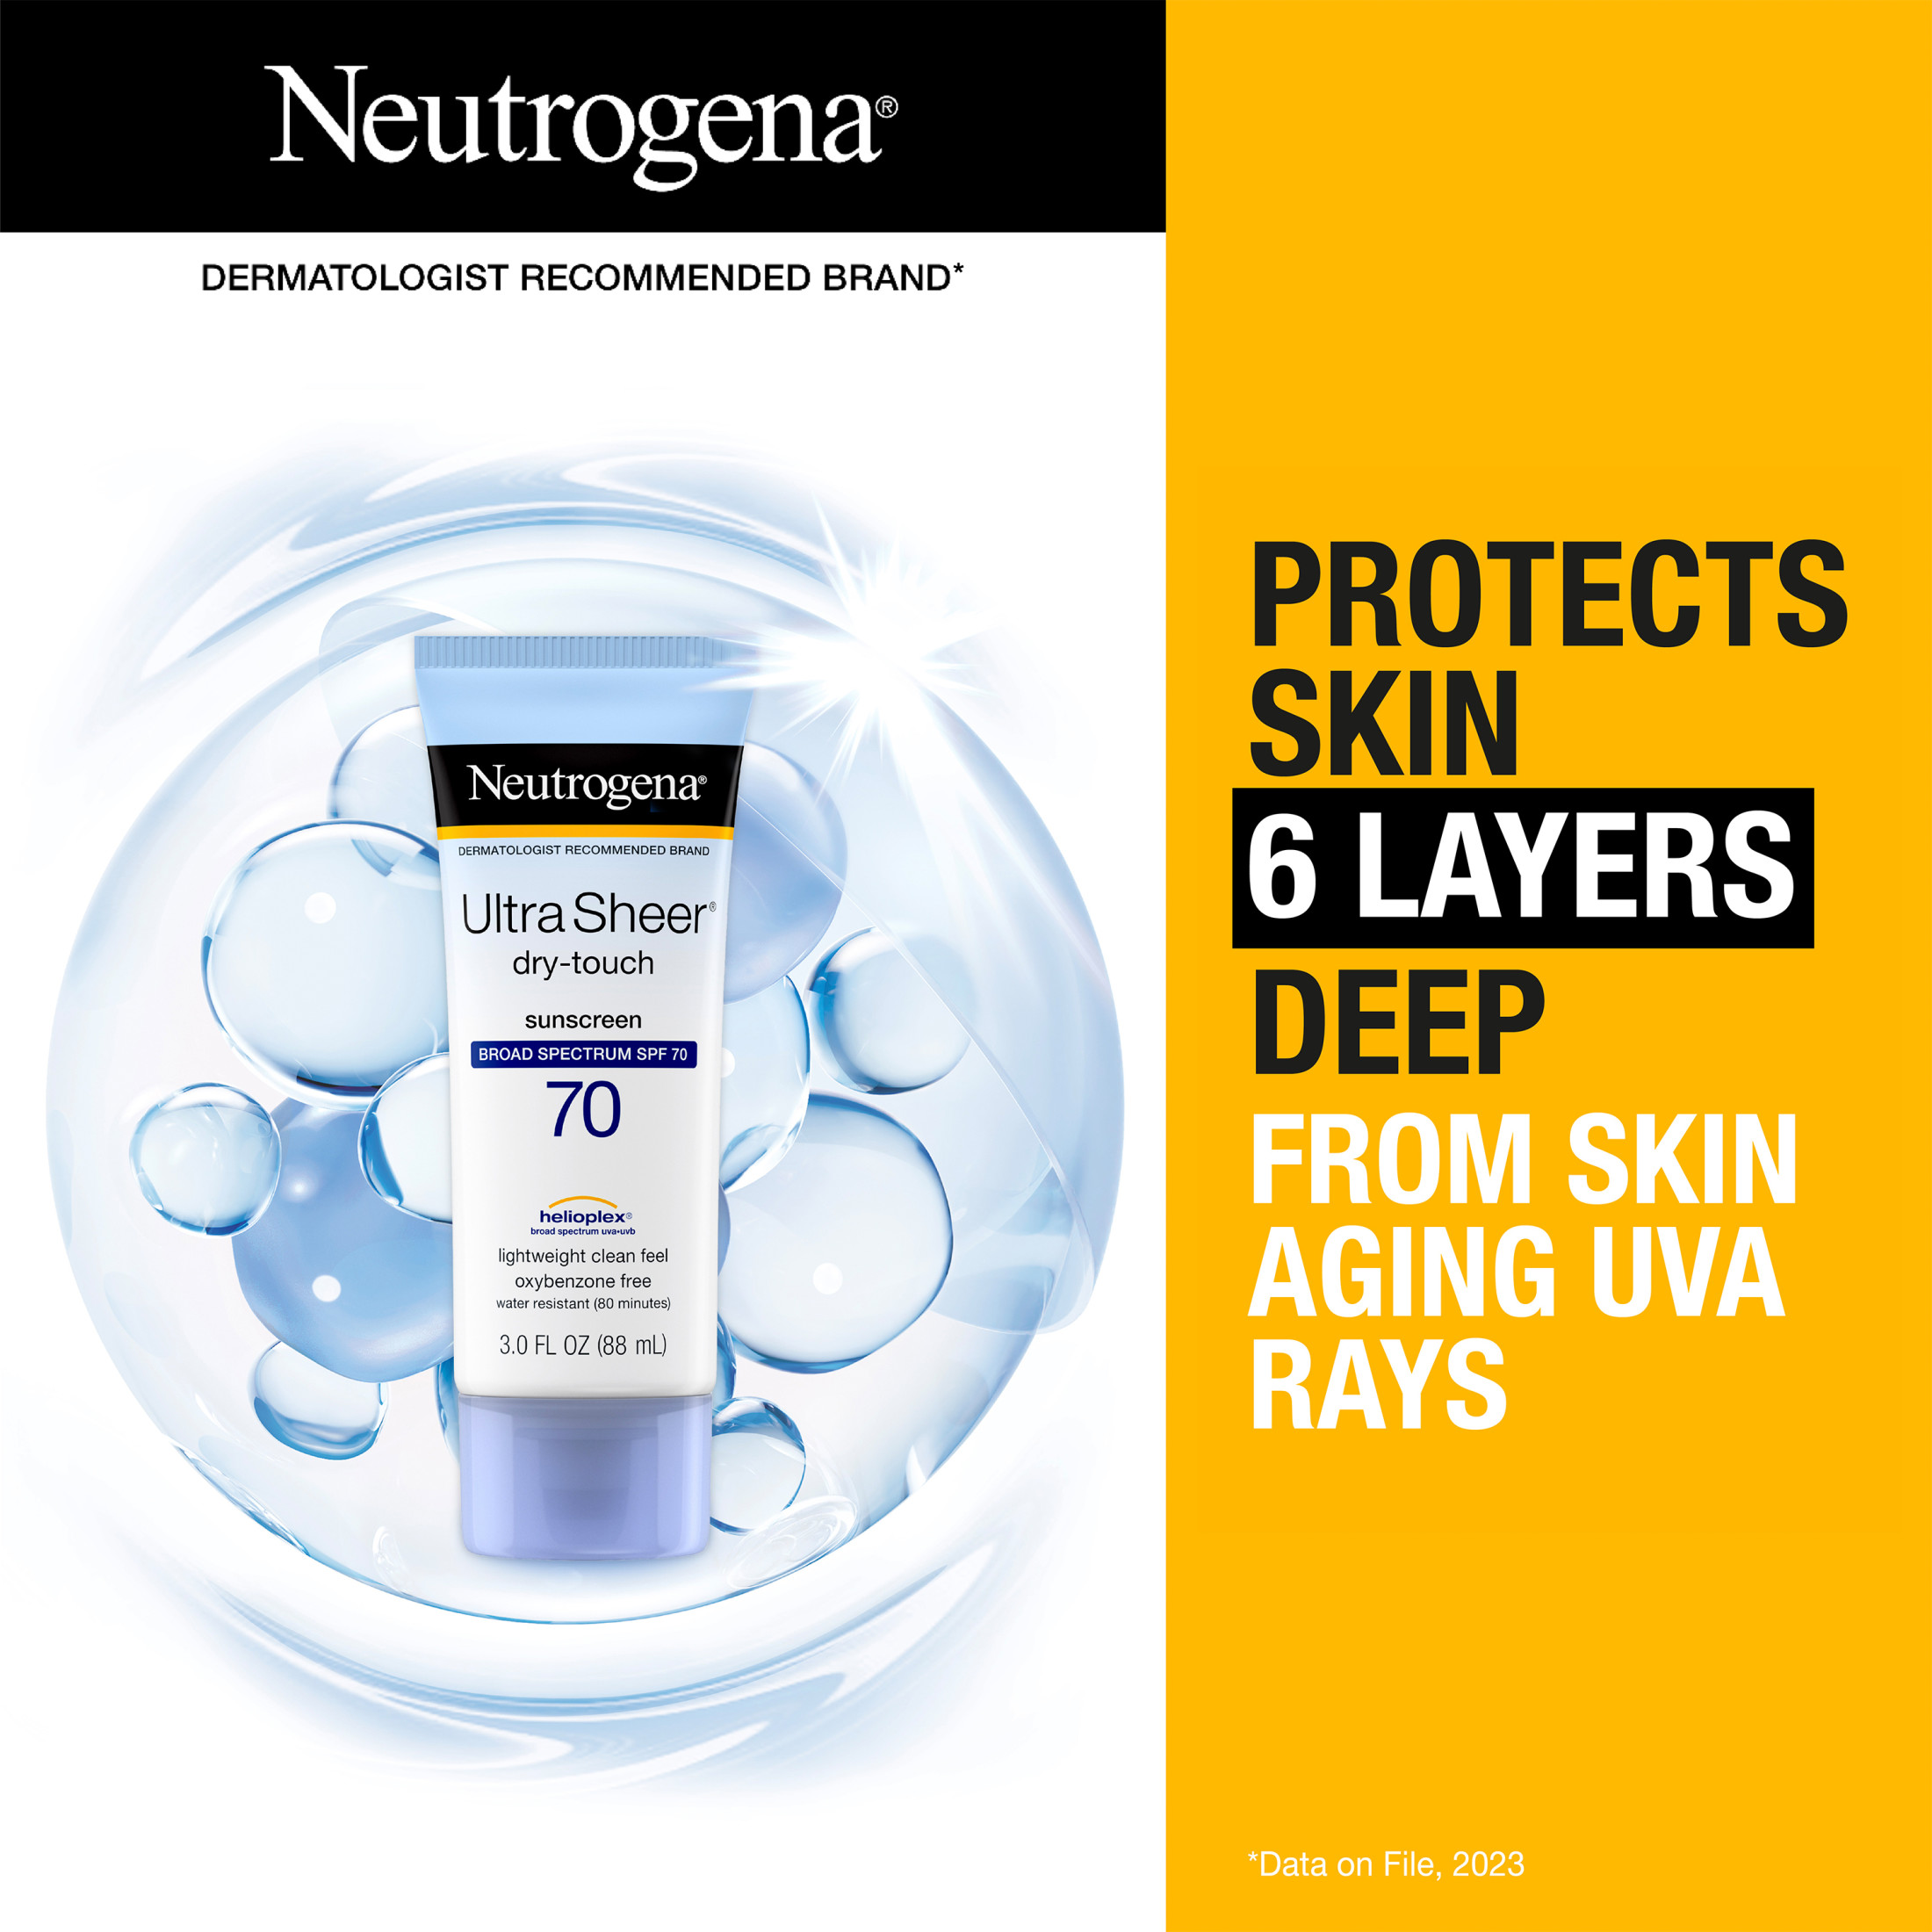 Neutrogena Ultra Sheer Dry-Touch Sunscreen Lotion, SPF 70 Face Sunblock, 3 fl oz - image 3 of 10